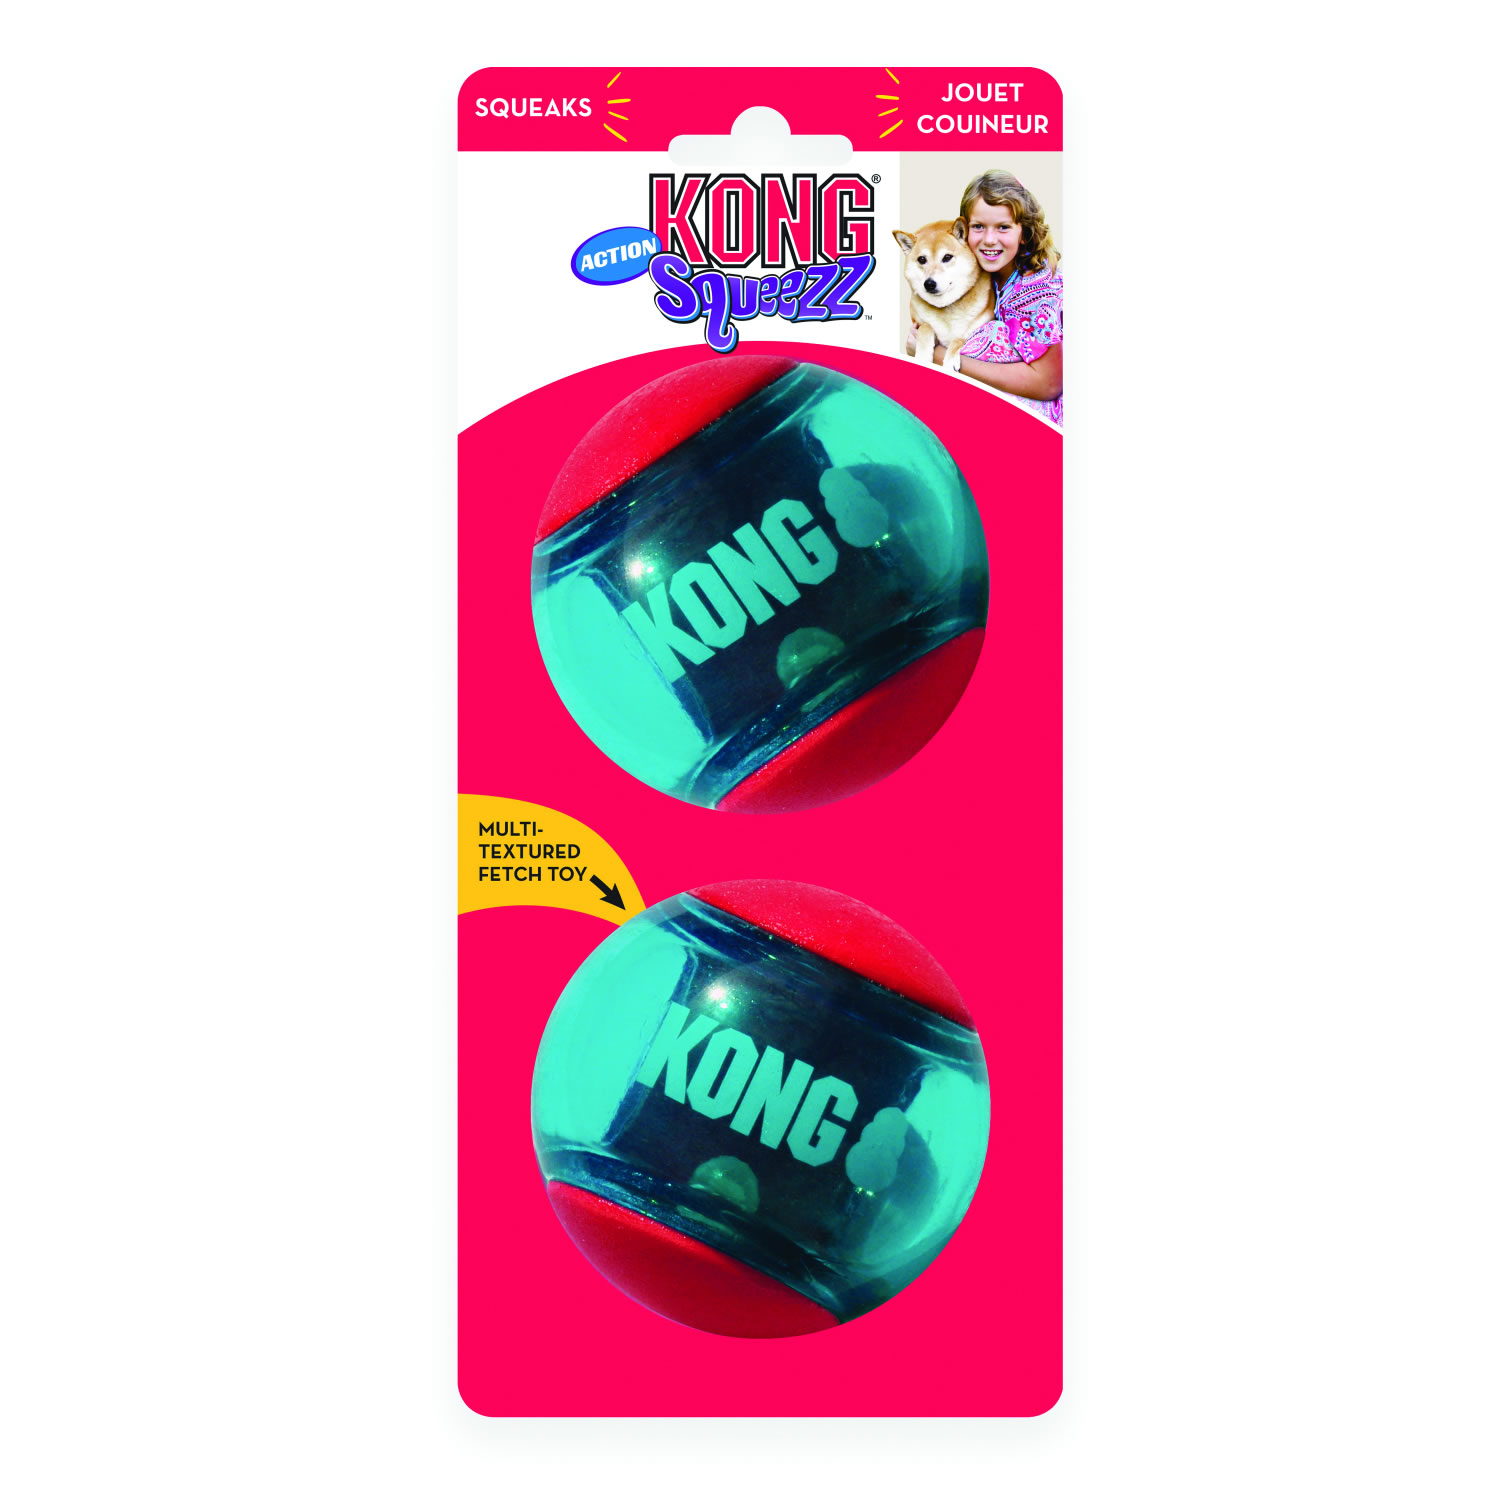 KONG SQUEEZZ ACTION BALL  LARGE RED 2 PACK